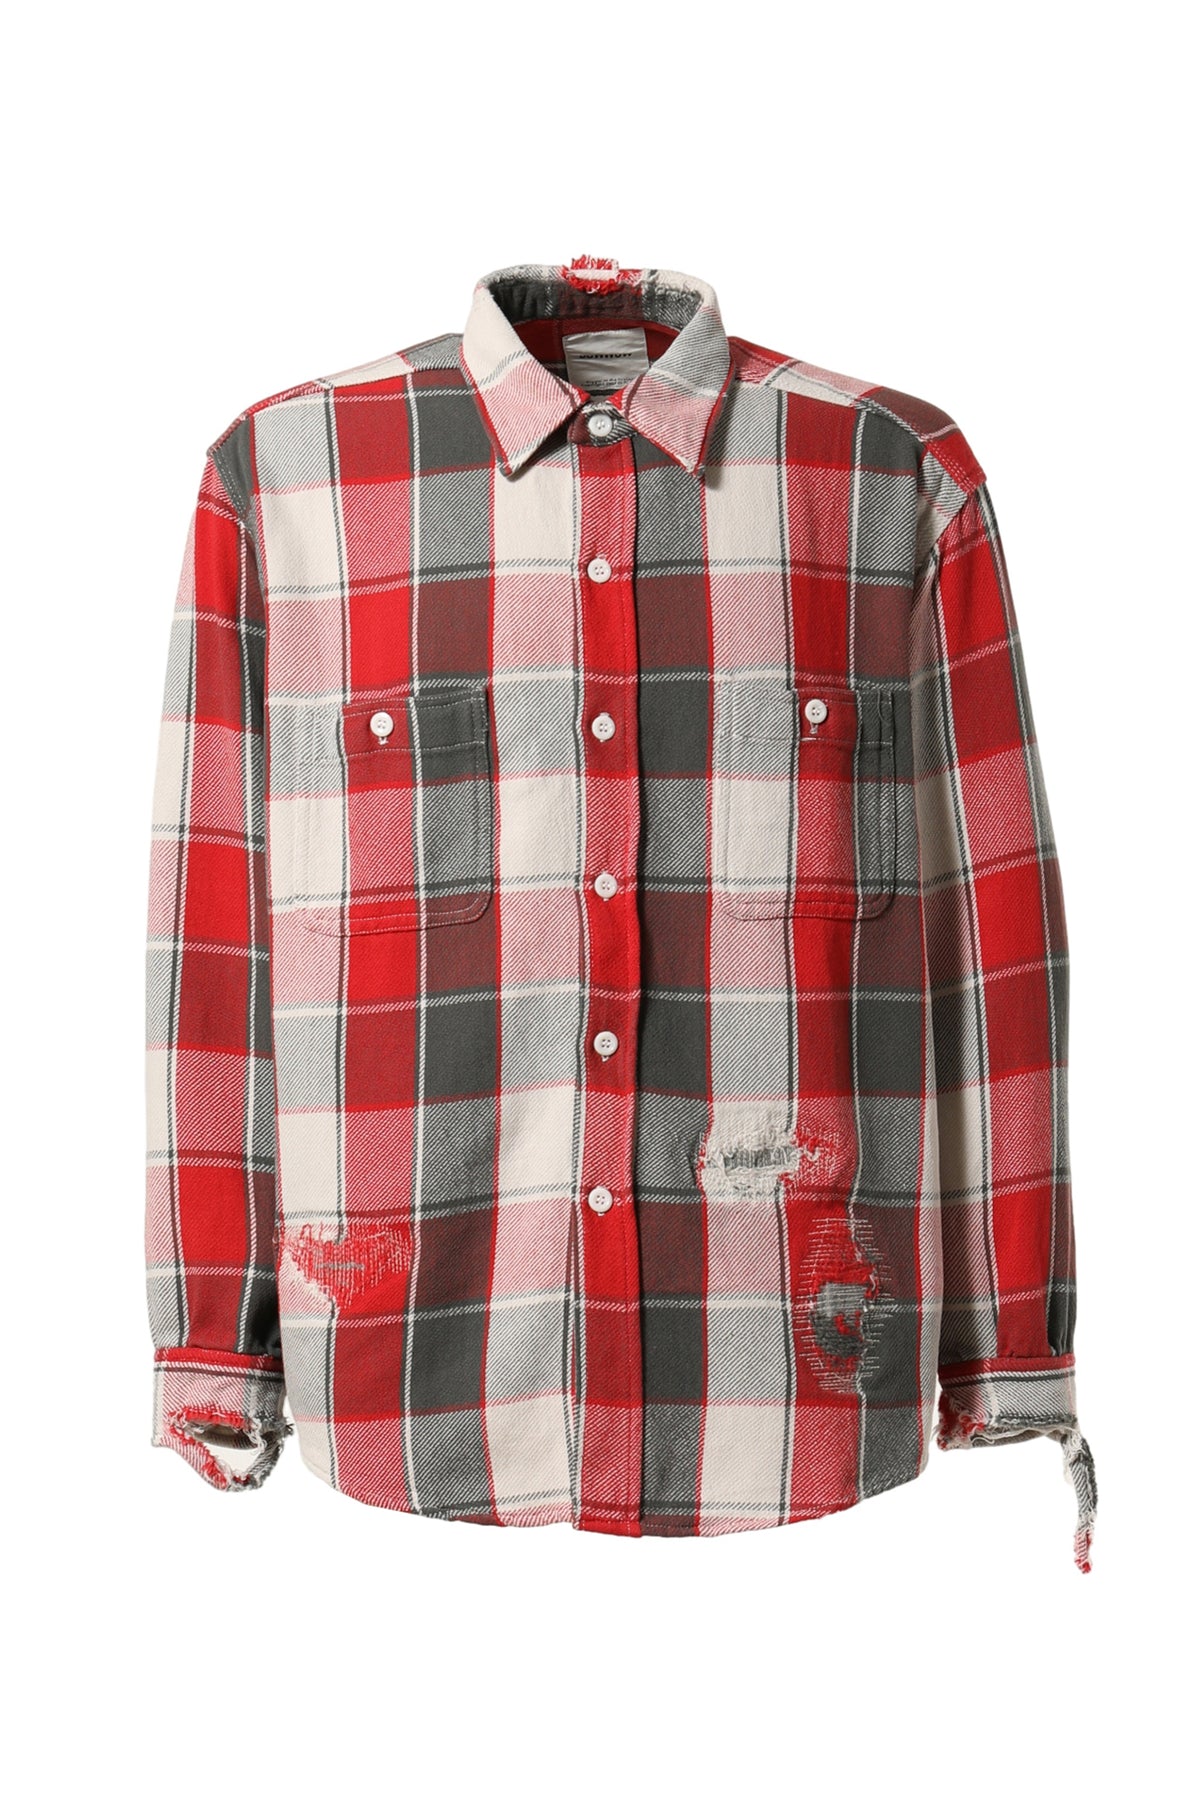 BOW WOW REPAIR AGEING FLANNEL SHIRTS / RED DAMAGE